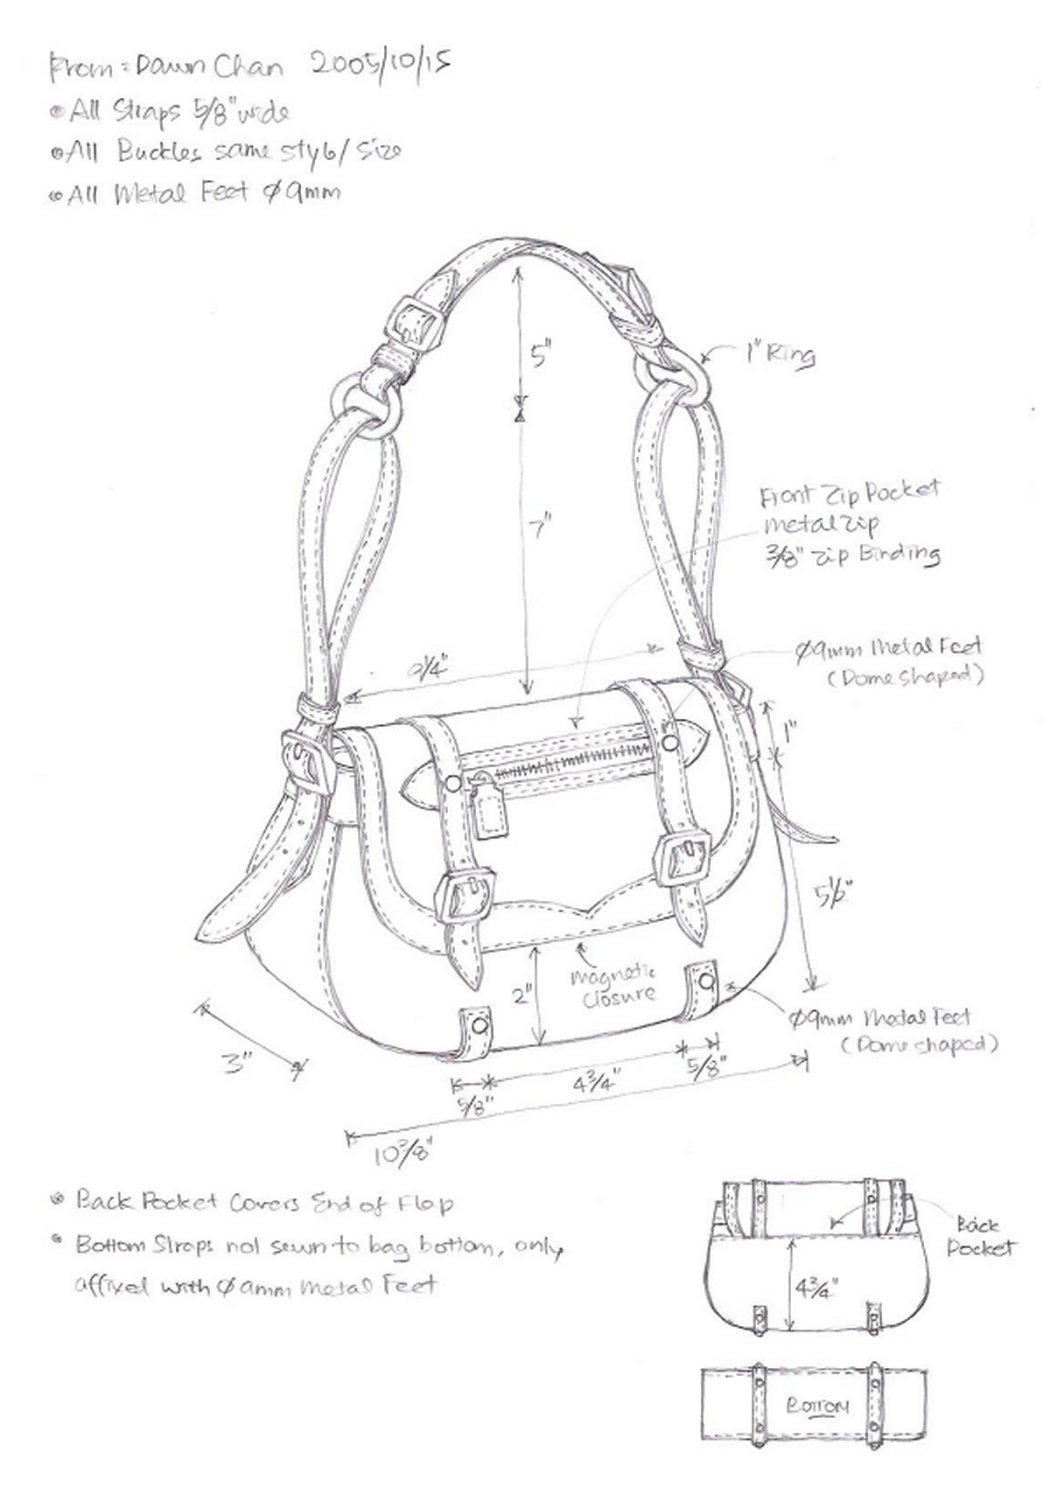 submitted the sketch for the custom made leather handbag shown below